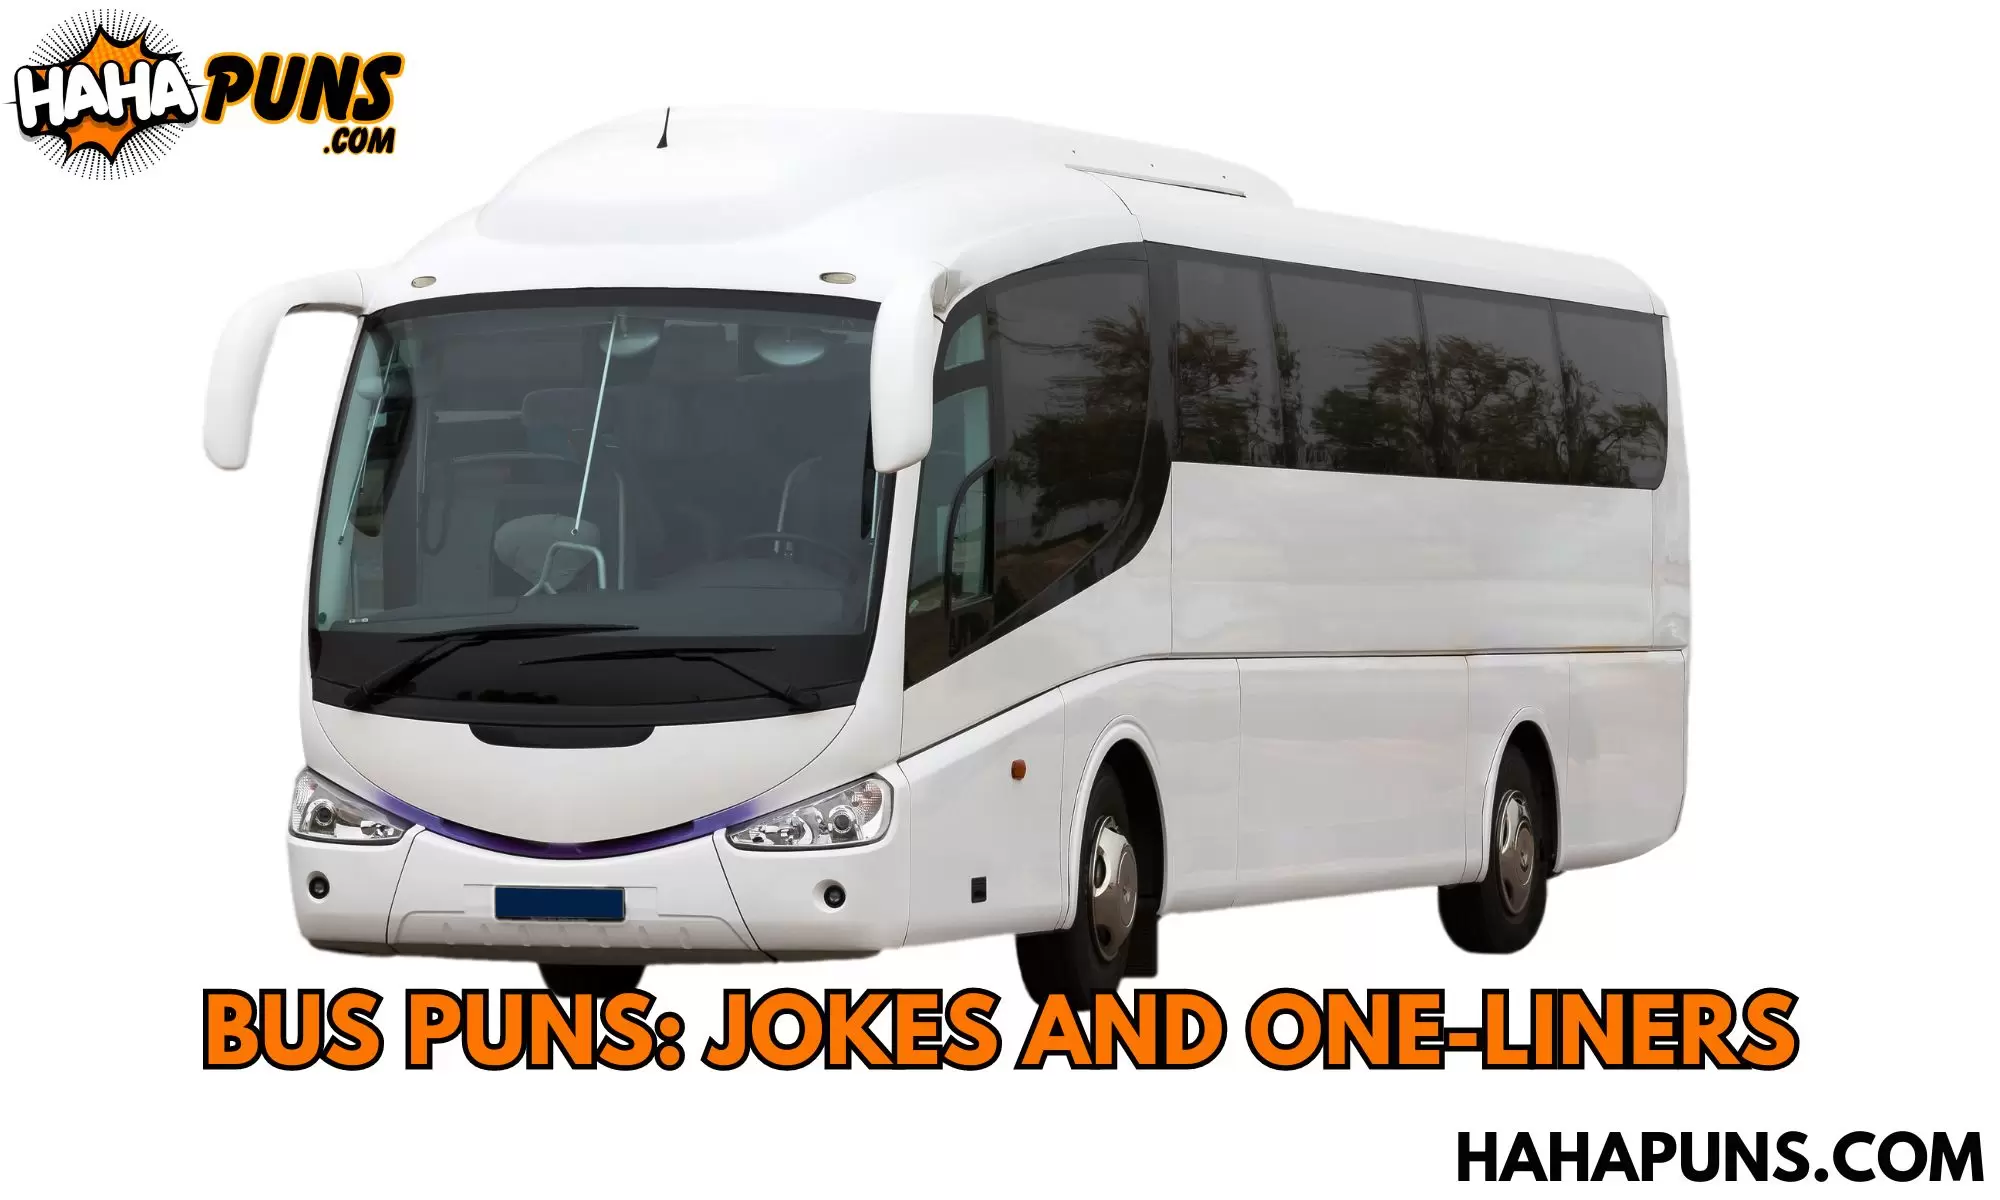 Bus Puns: Jokes And One-Liners